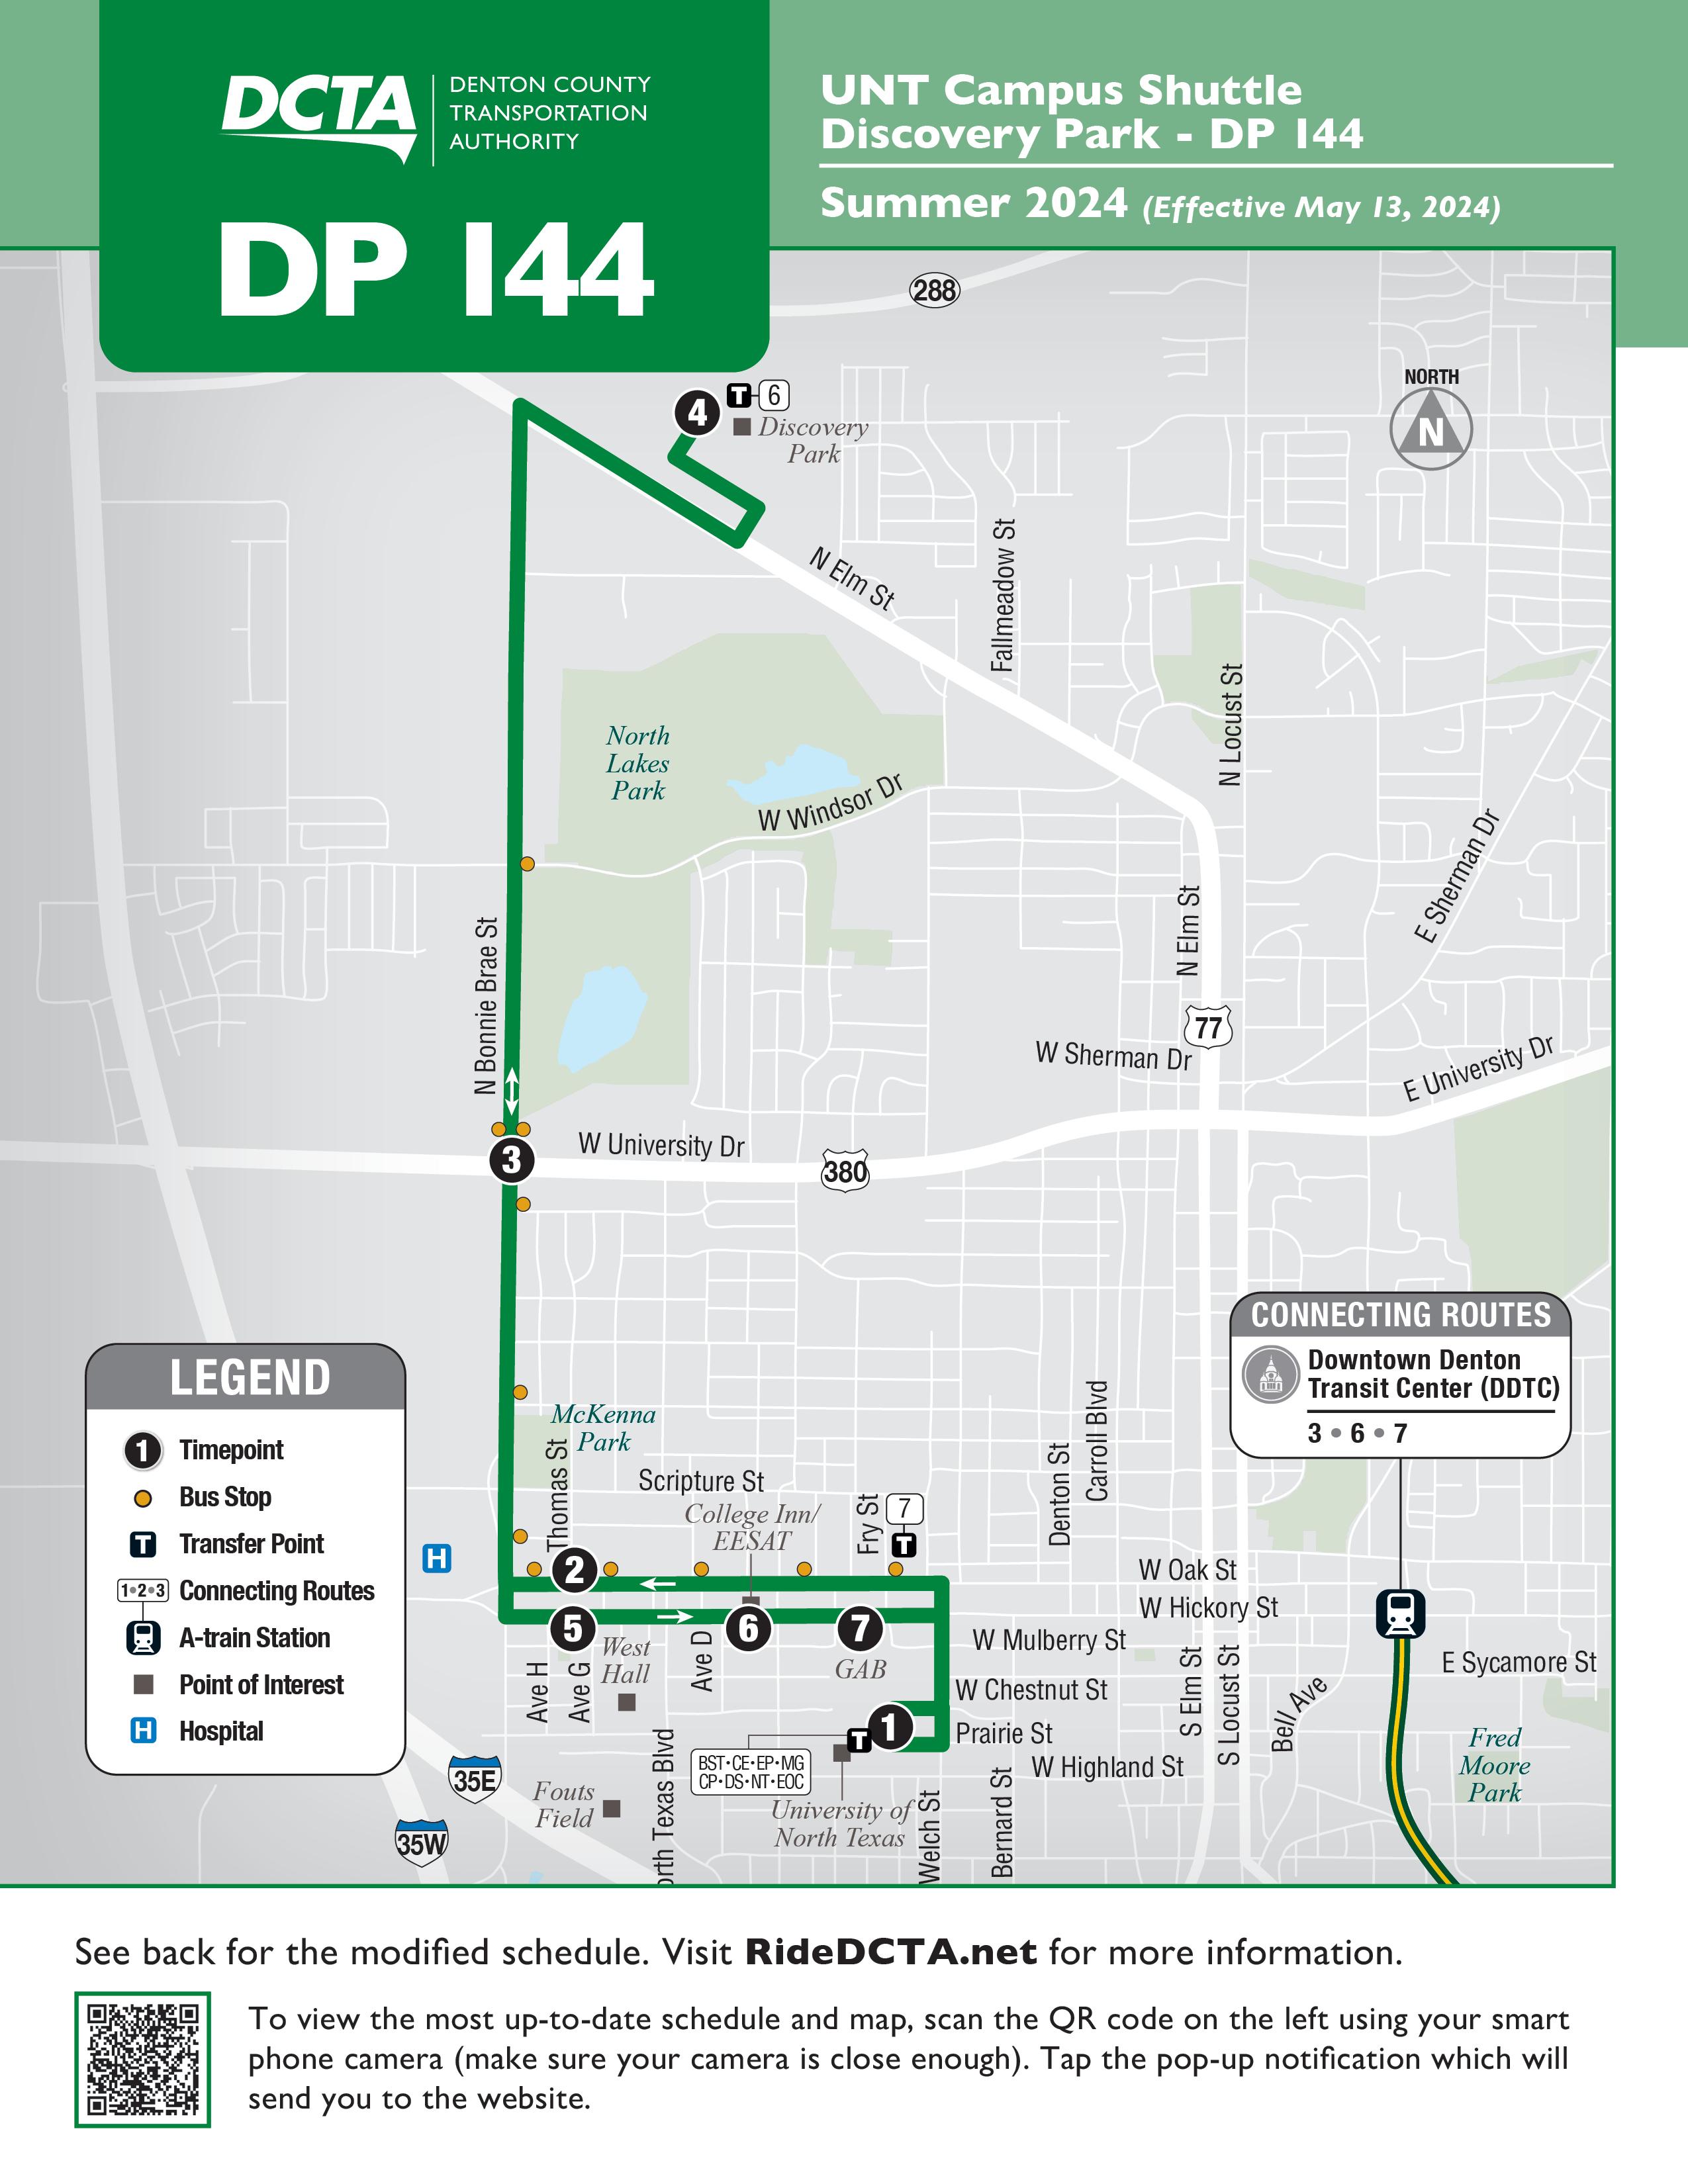 DP 144 Summer Route FY24 Map